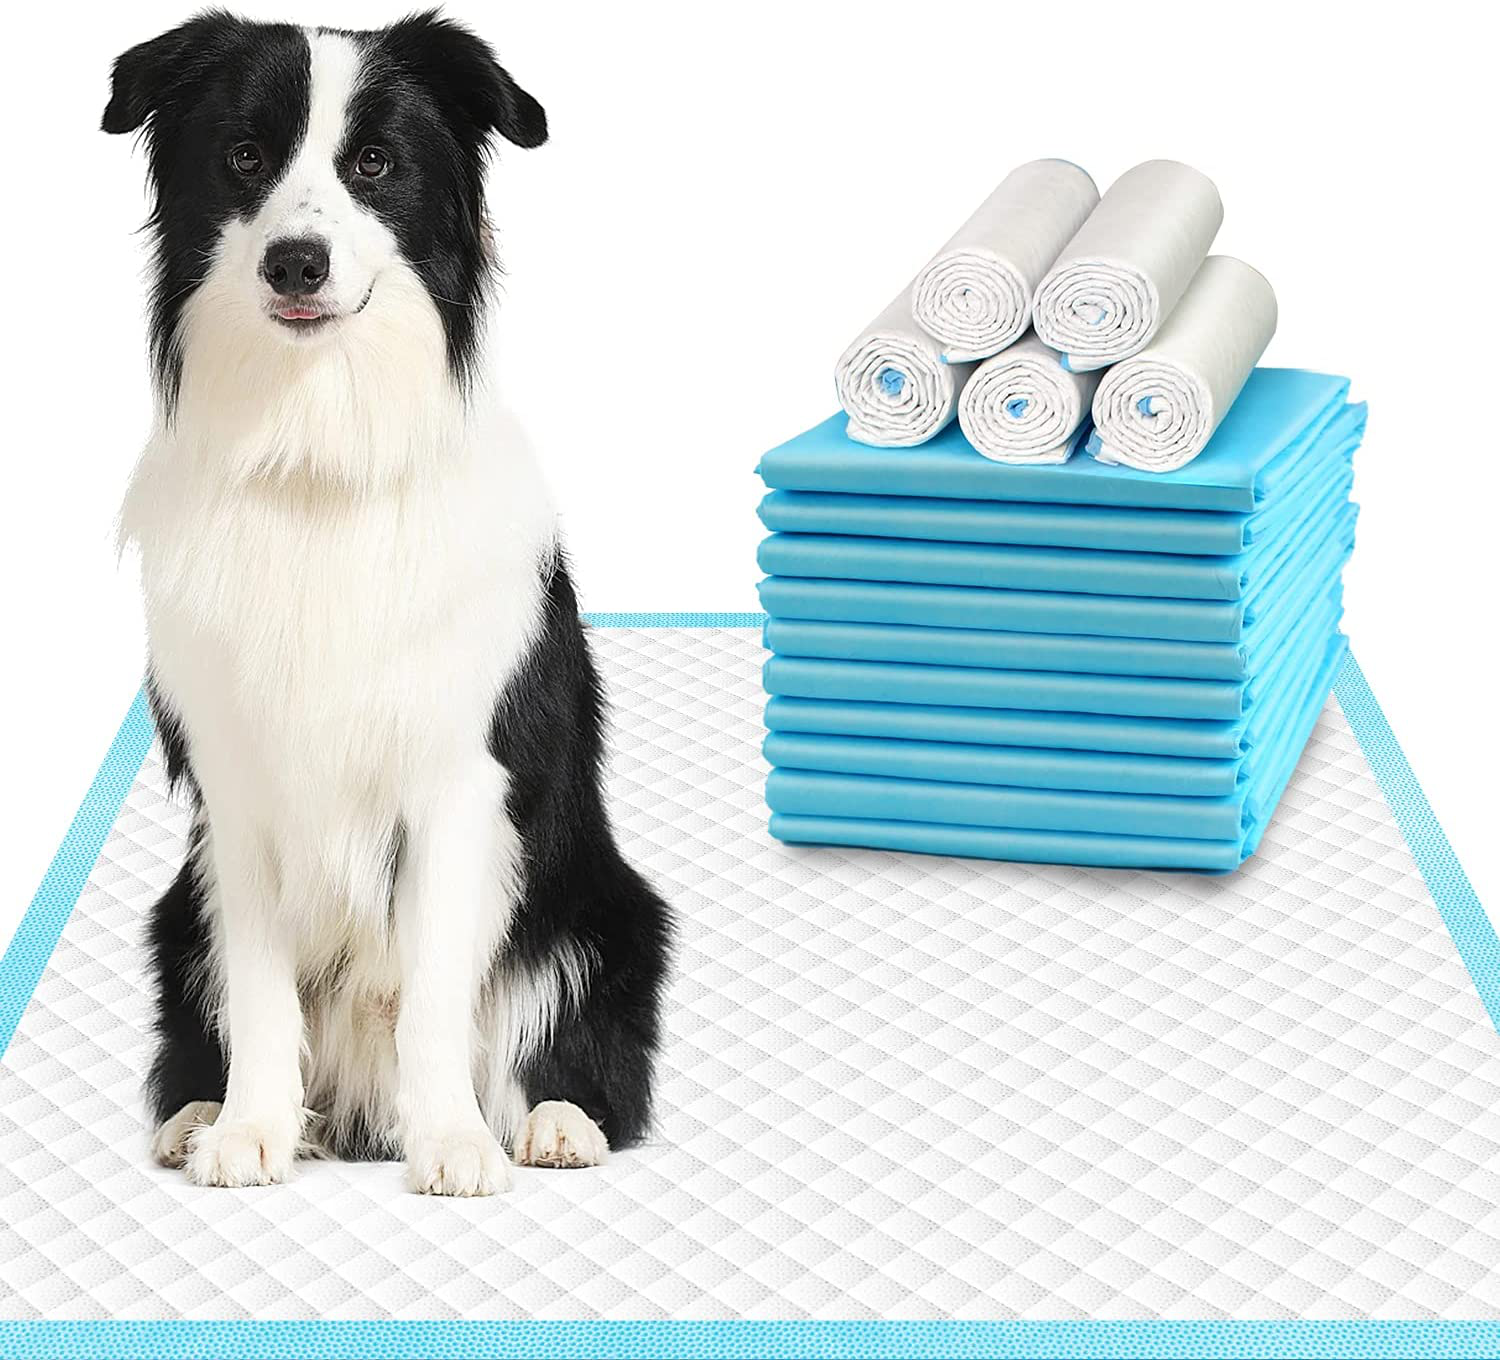 Deep Dear Extra Large Dog Pee Pads, Thicker Puppy Pads, Super Absorbent Pee Pads for Dogs, Disposable Dog Training Pads for Doggies, Cats, Rabbits, Leak-Proof Pet Pads for Housetraining